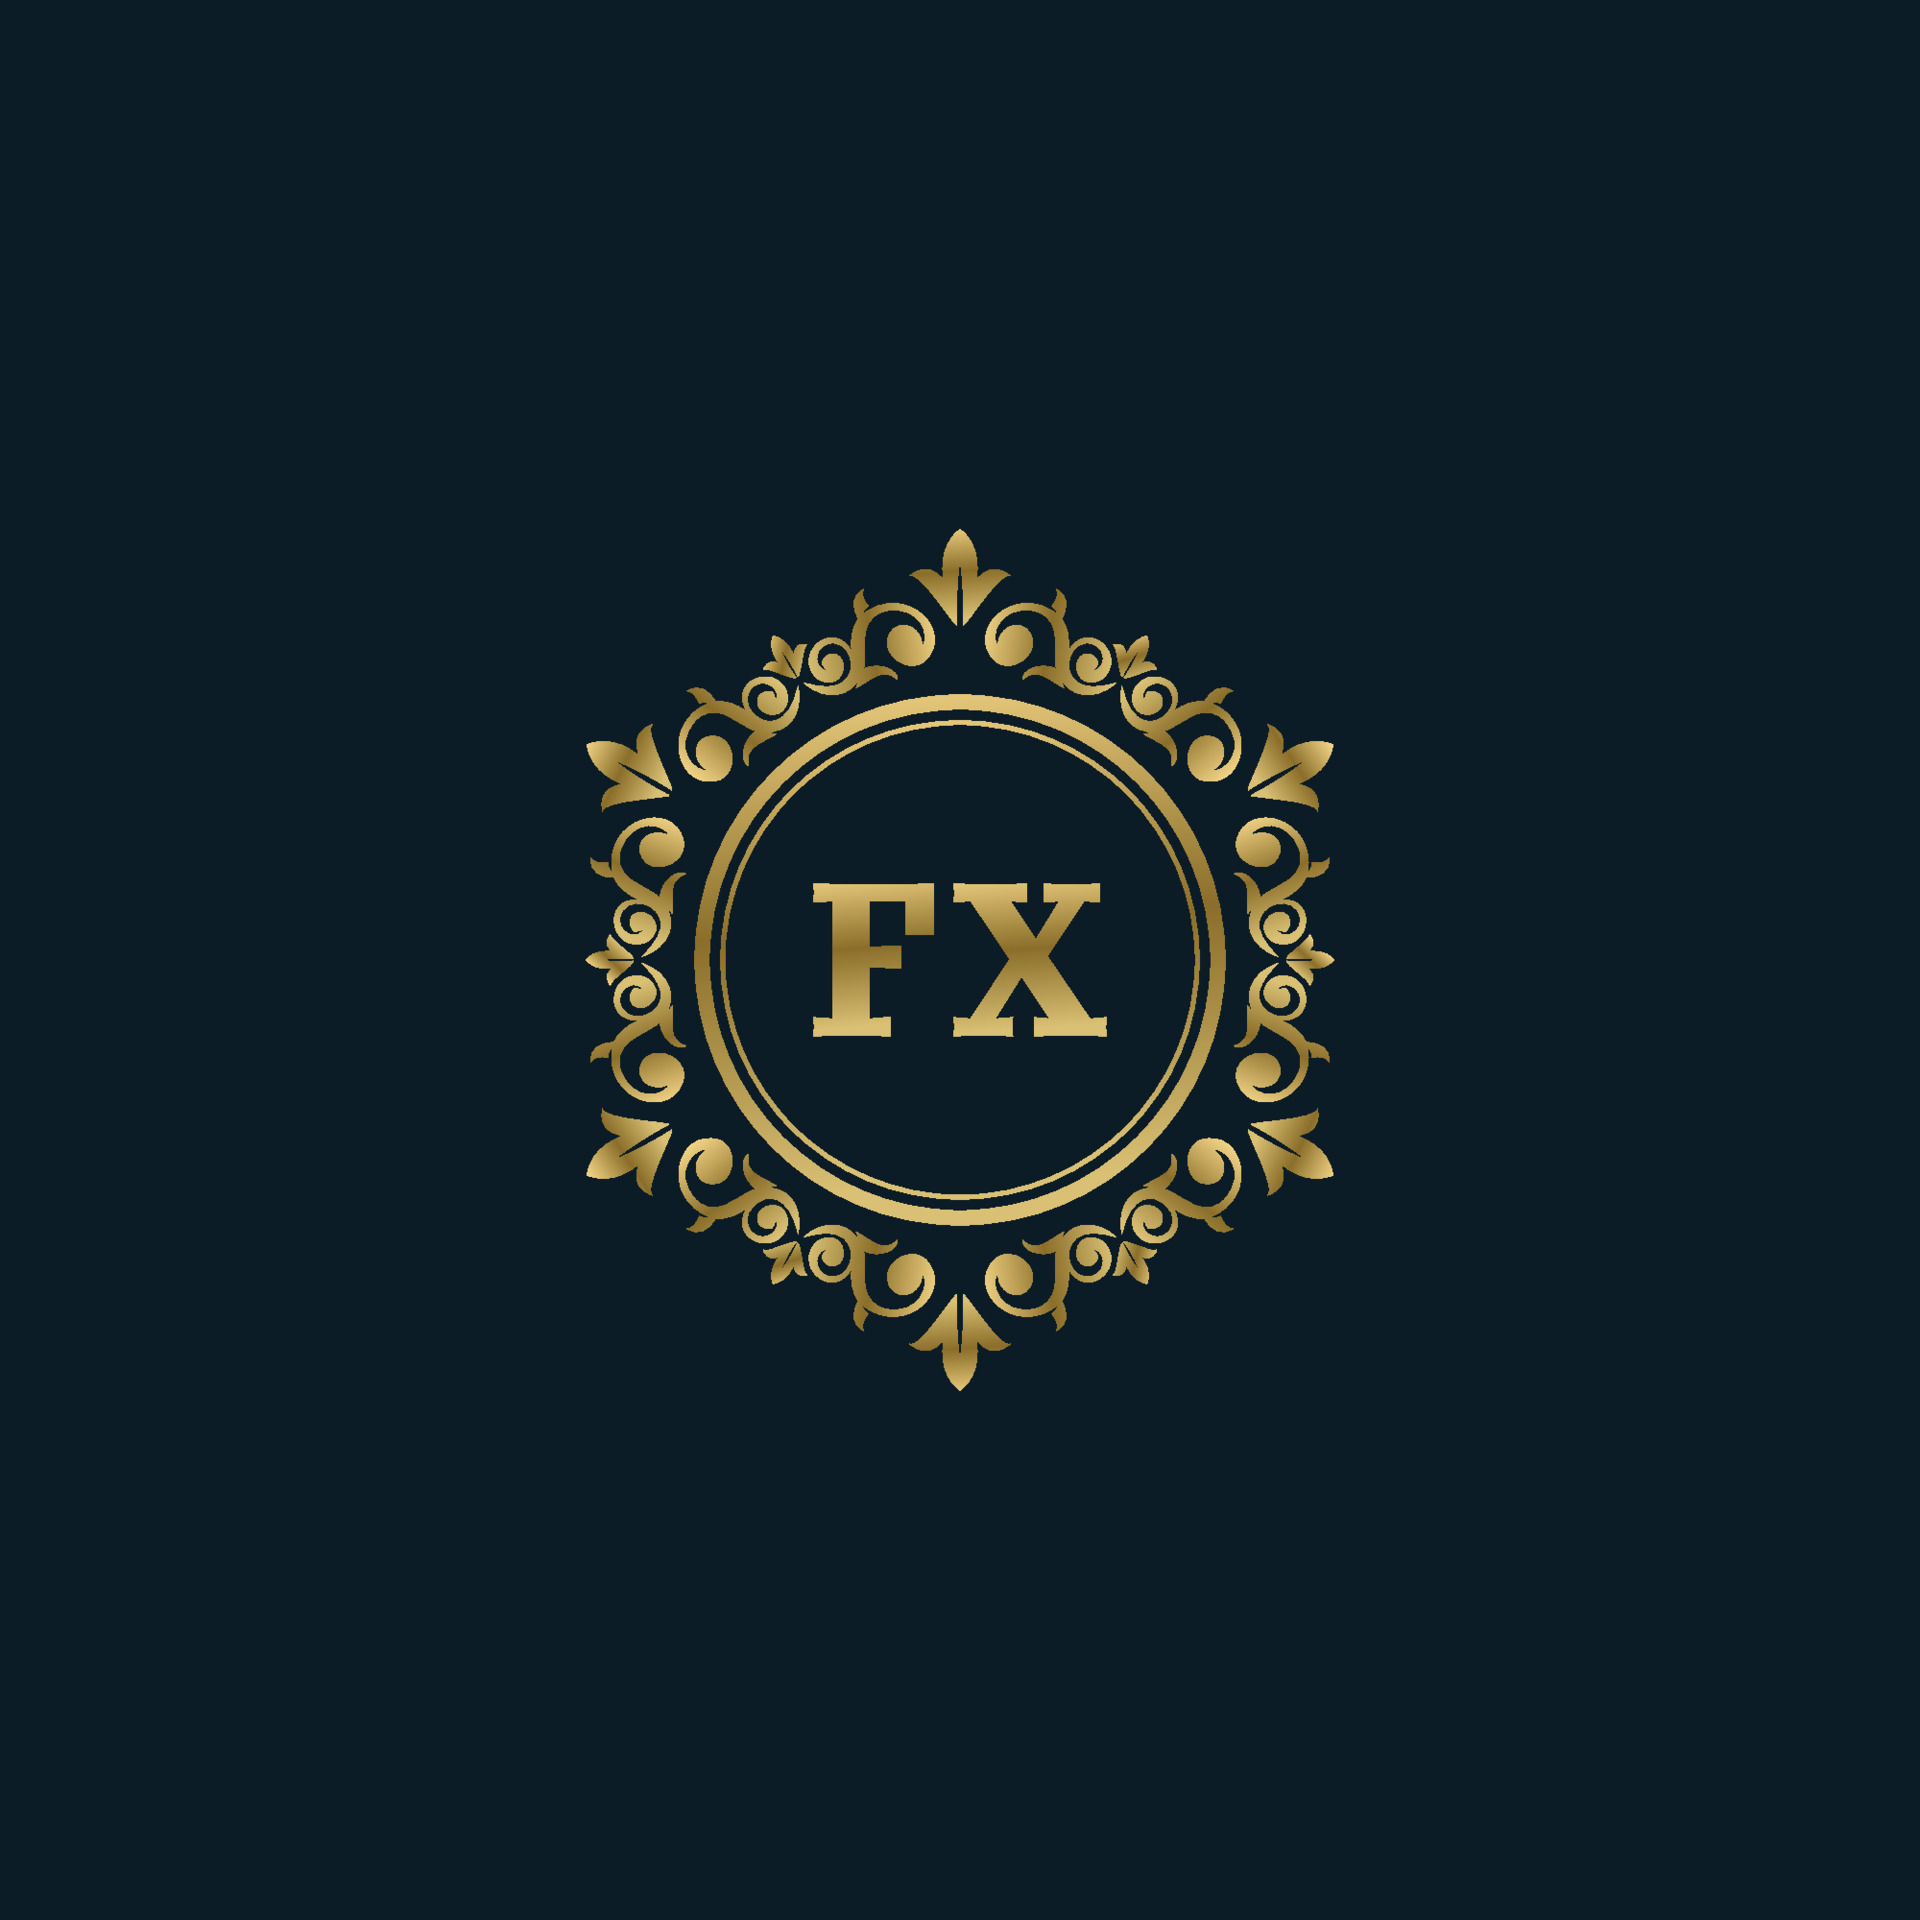 Letter FX logo with Luxury Gold template. Elegance logo vector